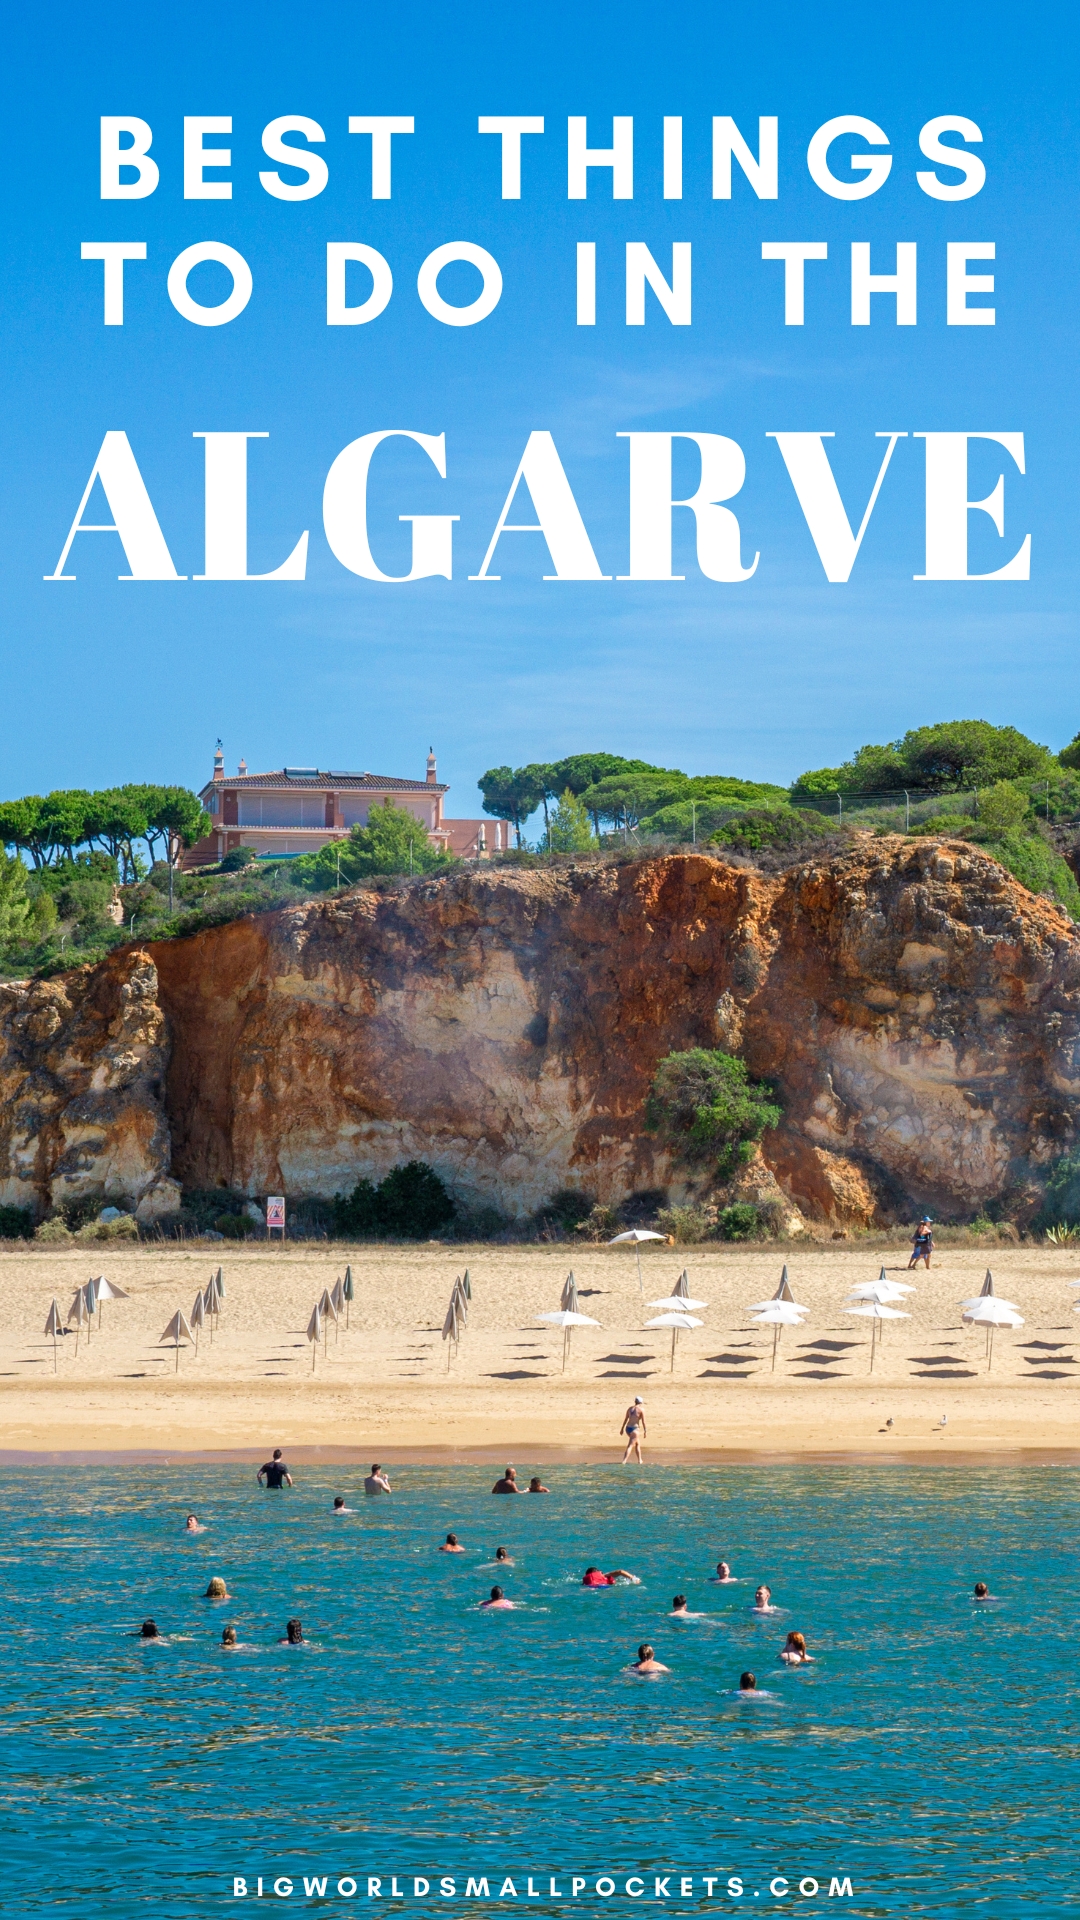 Best Things to Do in the Algarve, Portugal